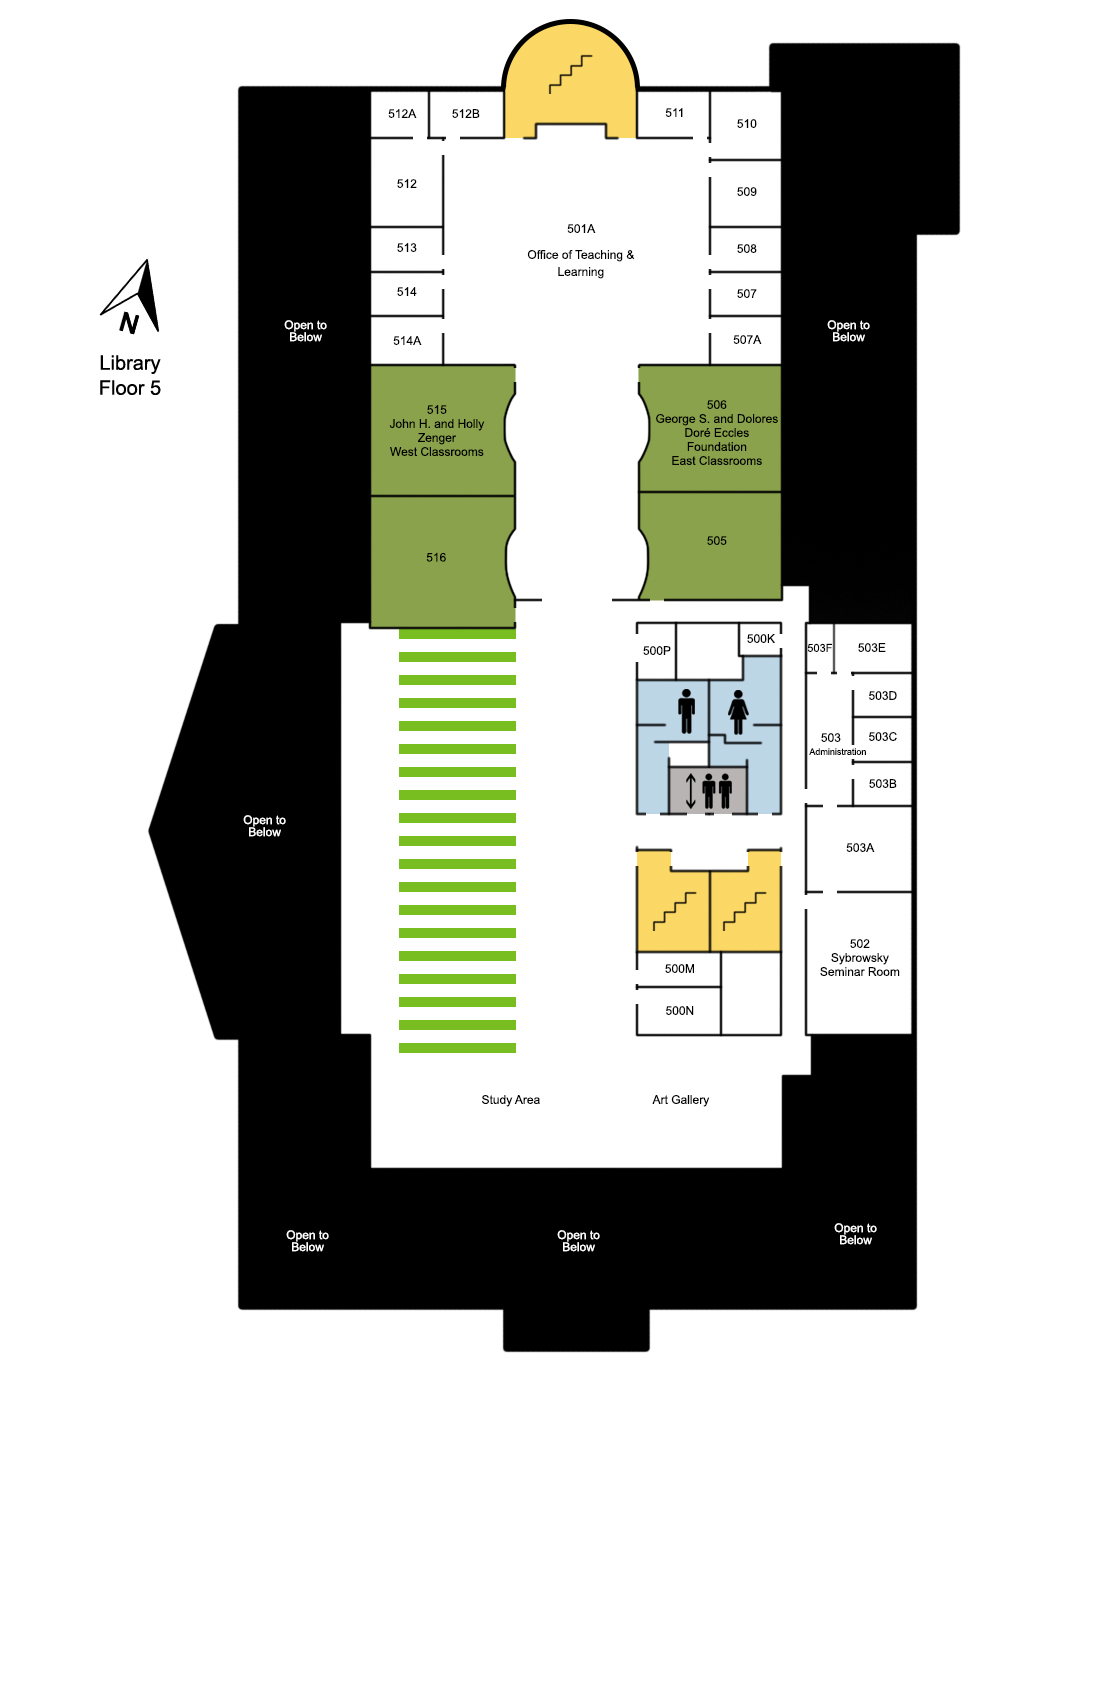 Fulton Library map of the fifth floor.